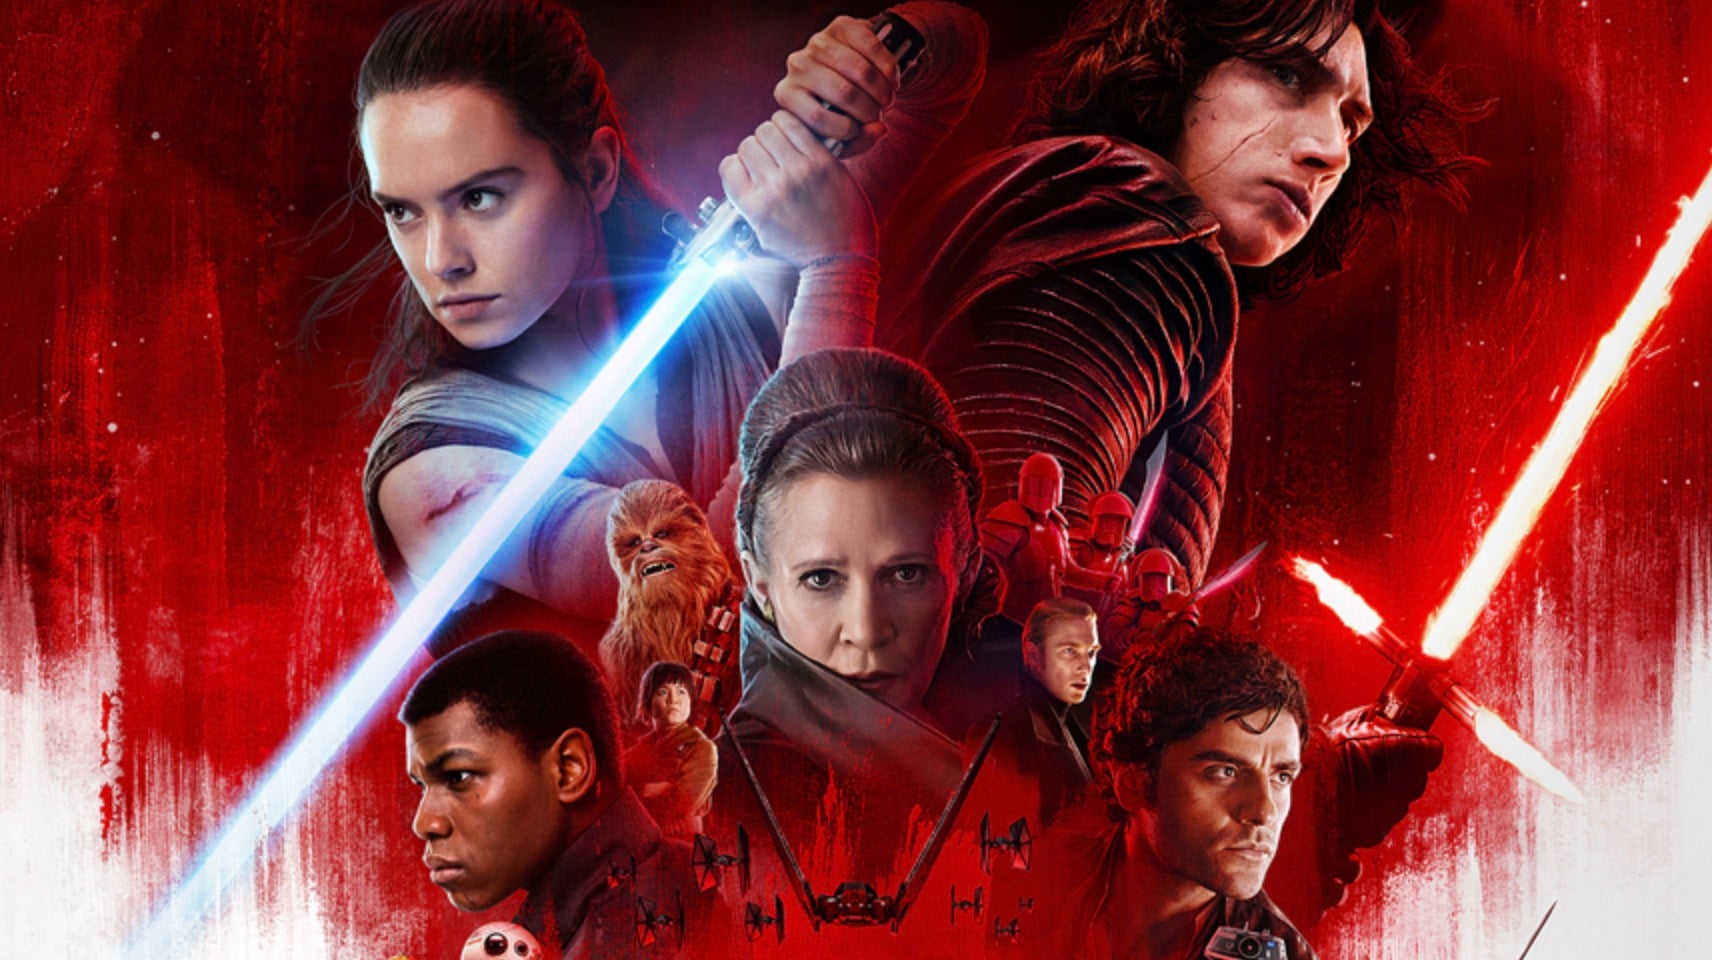 Everything We Know About Star Wars: The Last Jedi